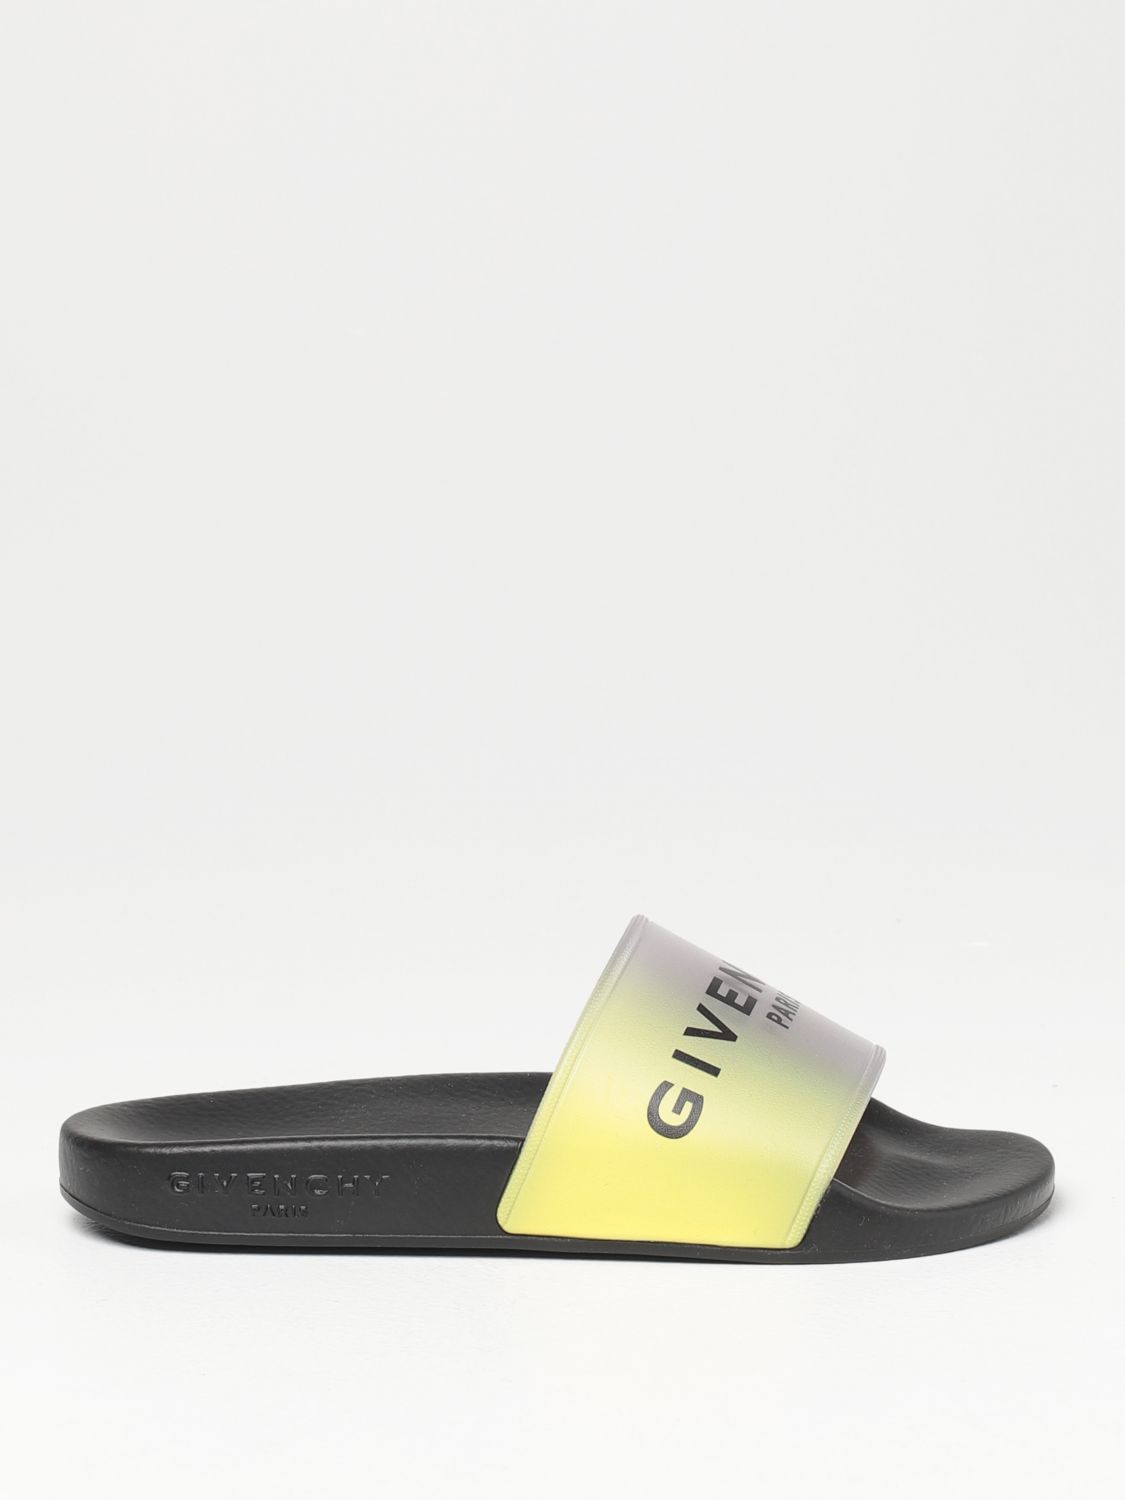 GIVENCHY: slide sandals in rubber - Multicolor | Givenchy shoes H19043  online on 